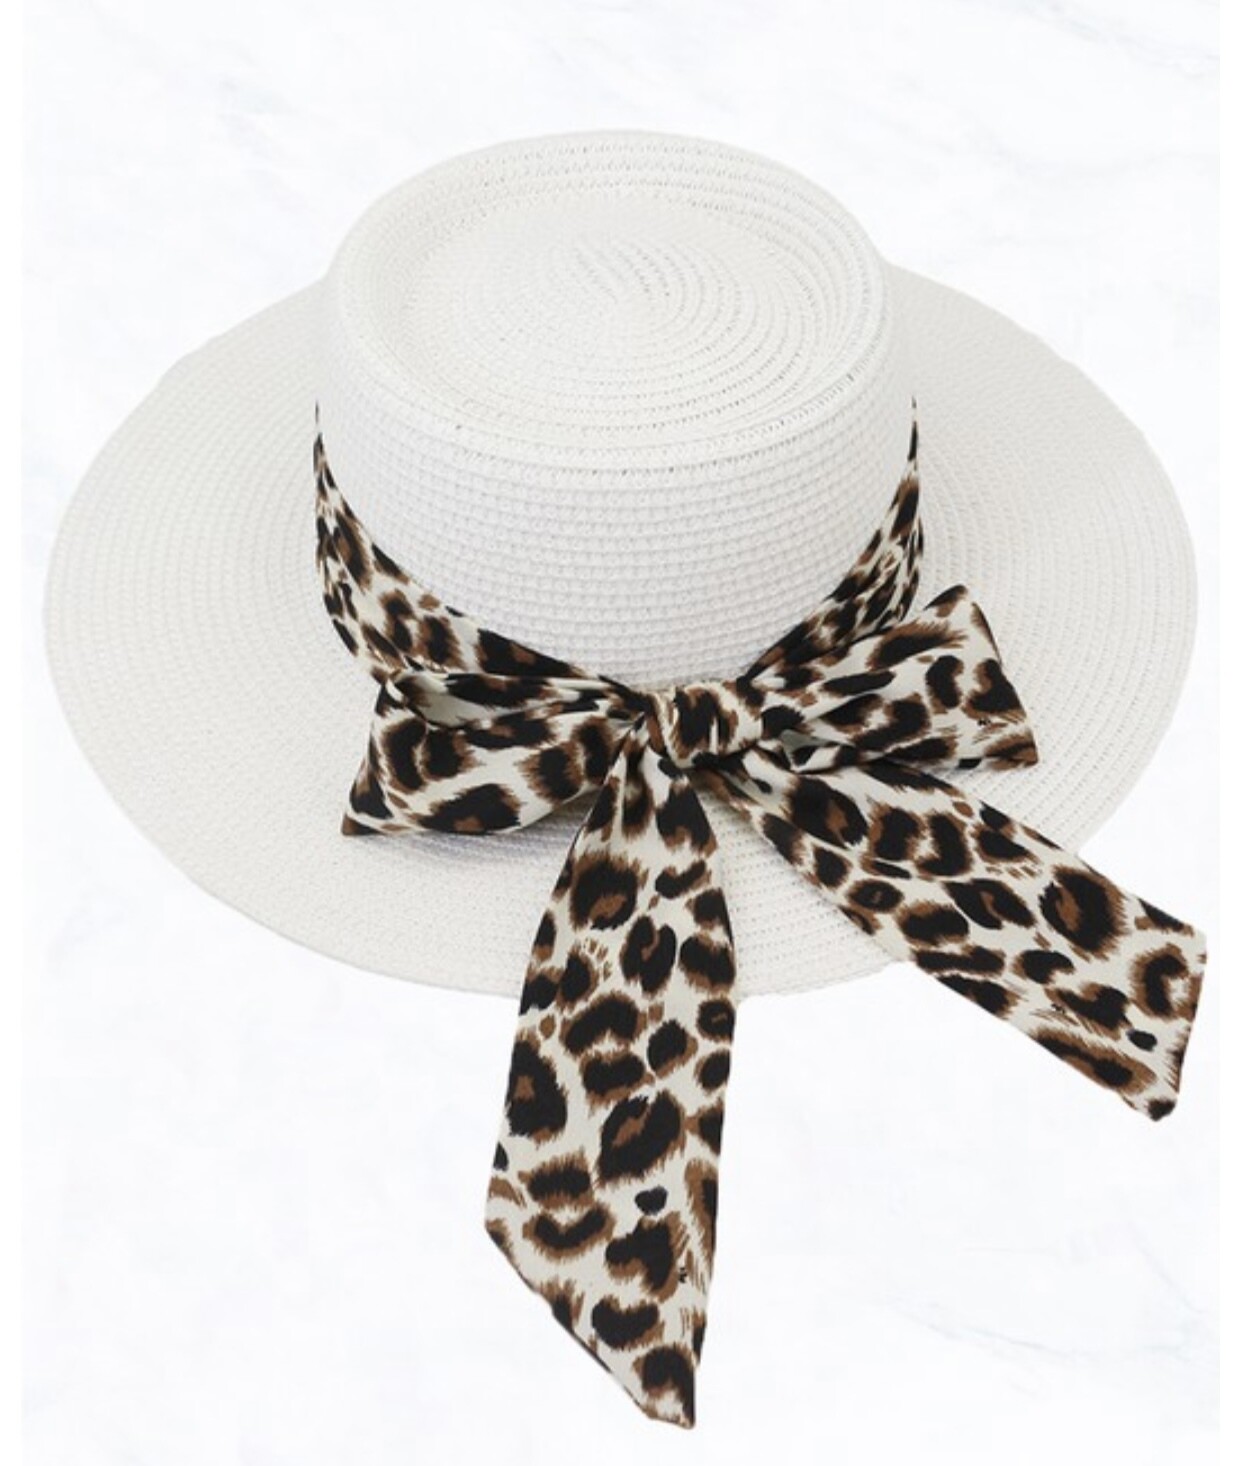 Sun Hat with Interchangeable Animal Scarf, White